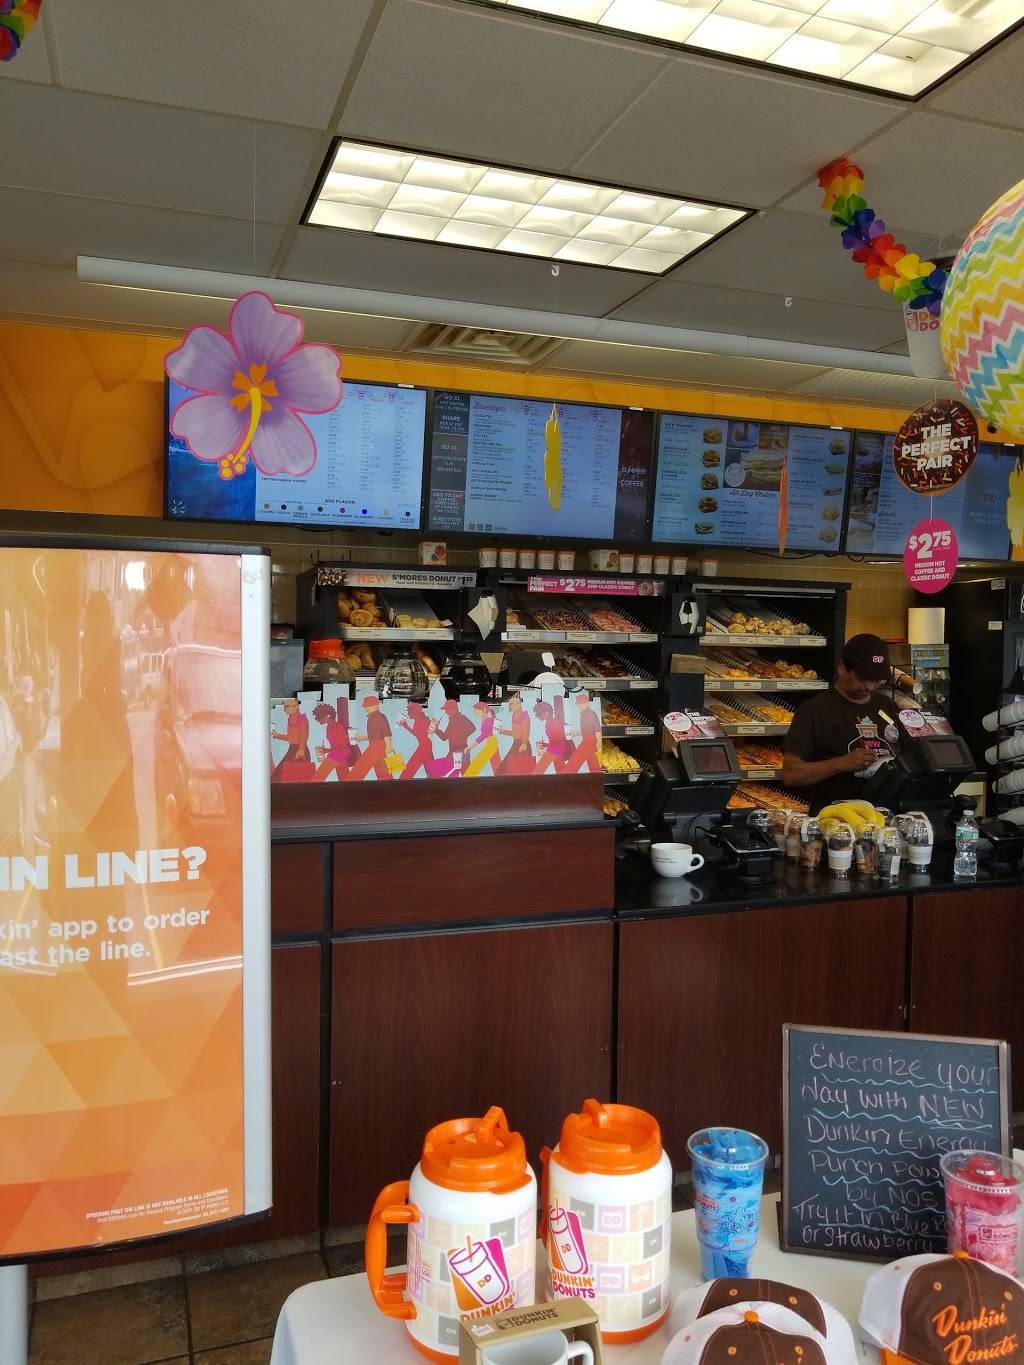 Dunkin Donuts | cafe | 161 Union Ave, Paterson, NJ 07502, USA | 9739041411 OR +1 973-904-1411